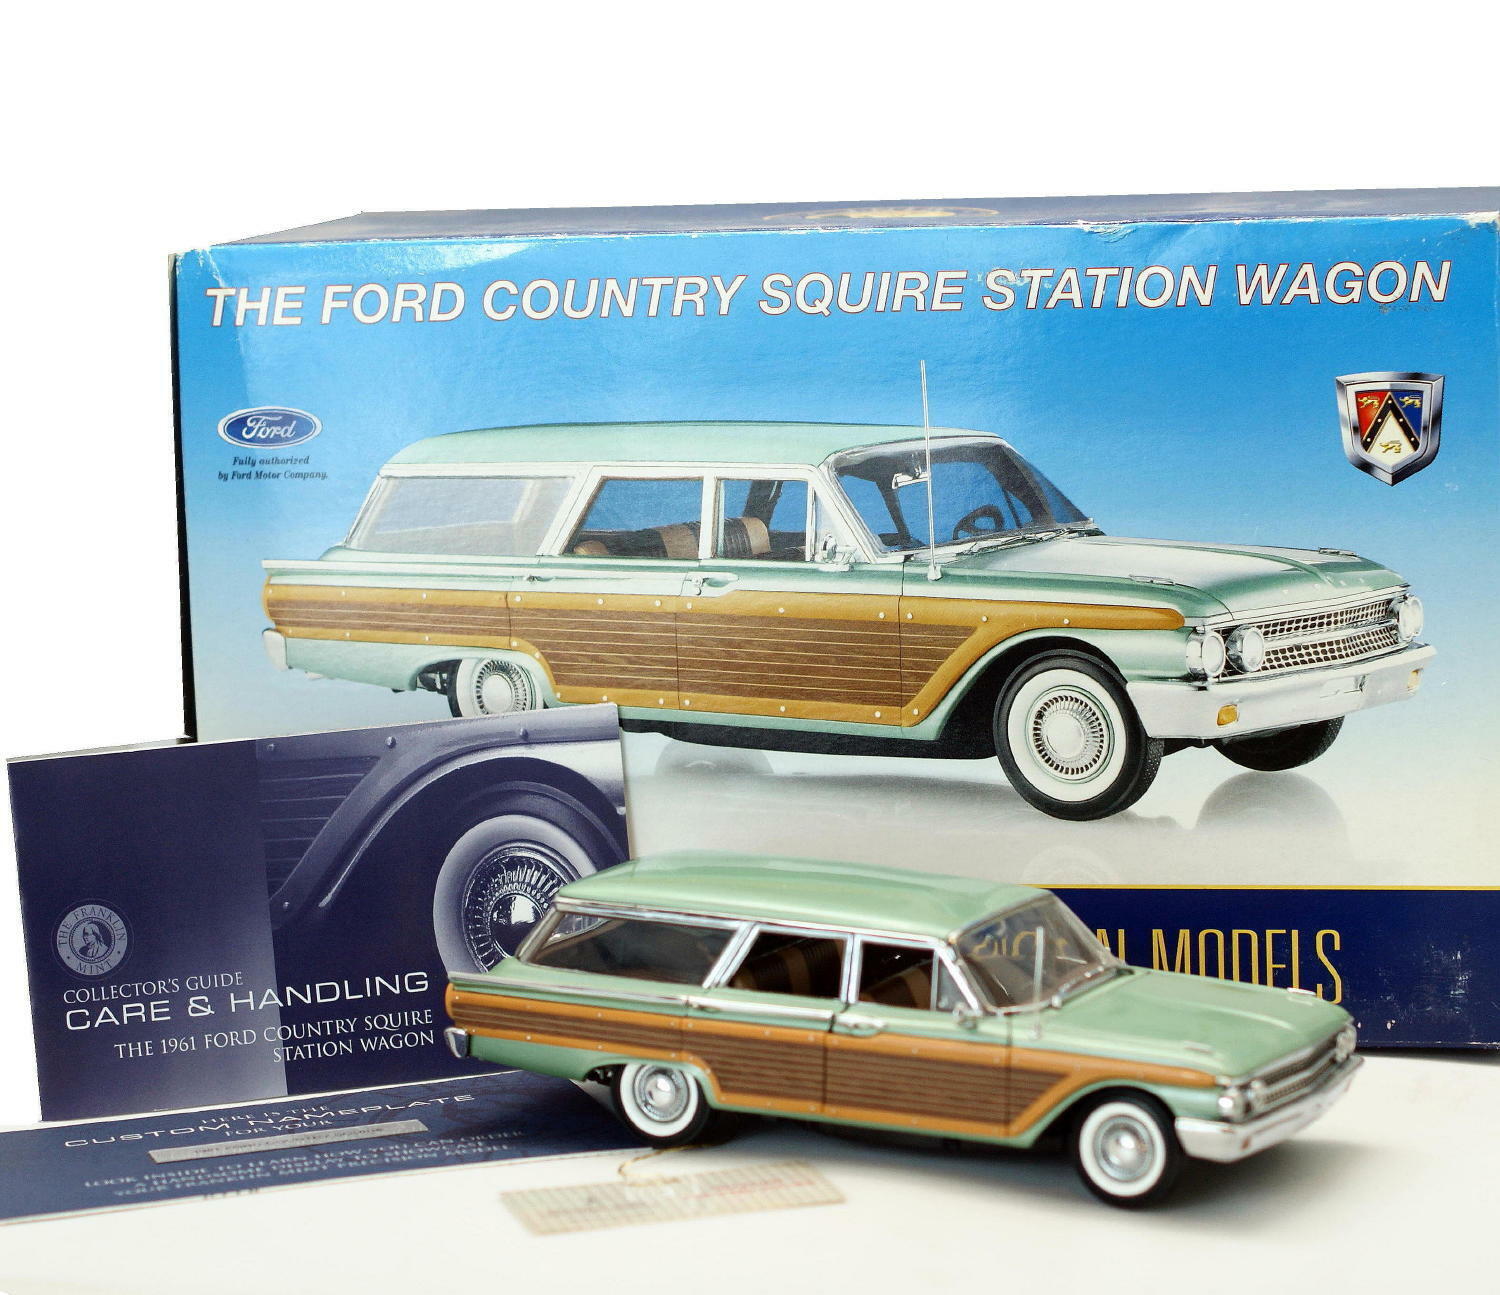 FRANKLIN MINT 1961 Ford Country Squire Station Wagon Diecast 1:24 FREE SHIPPING